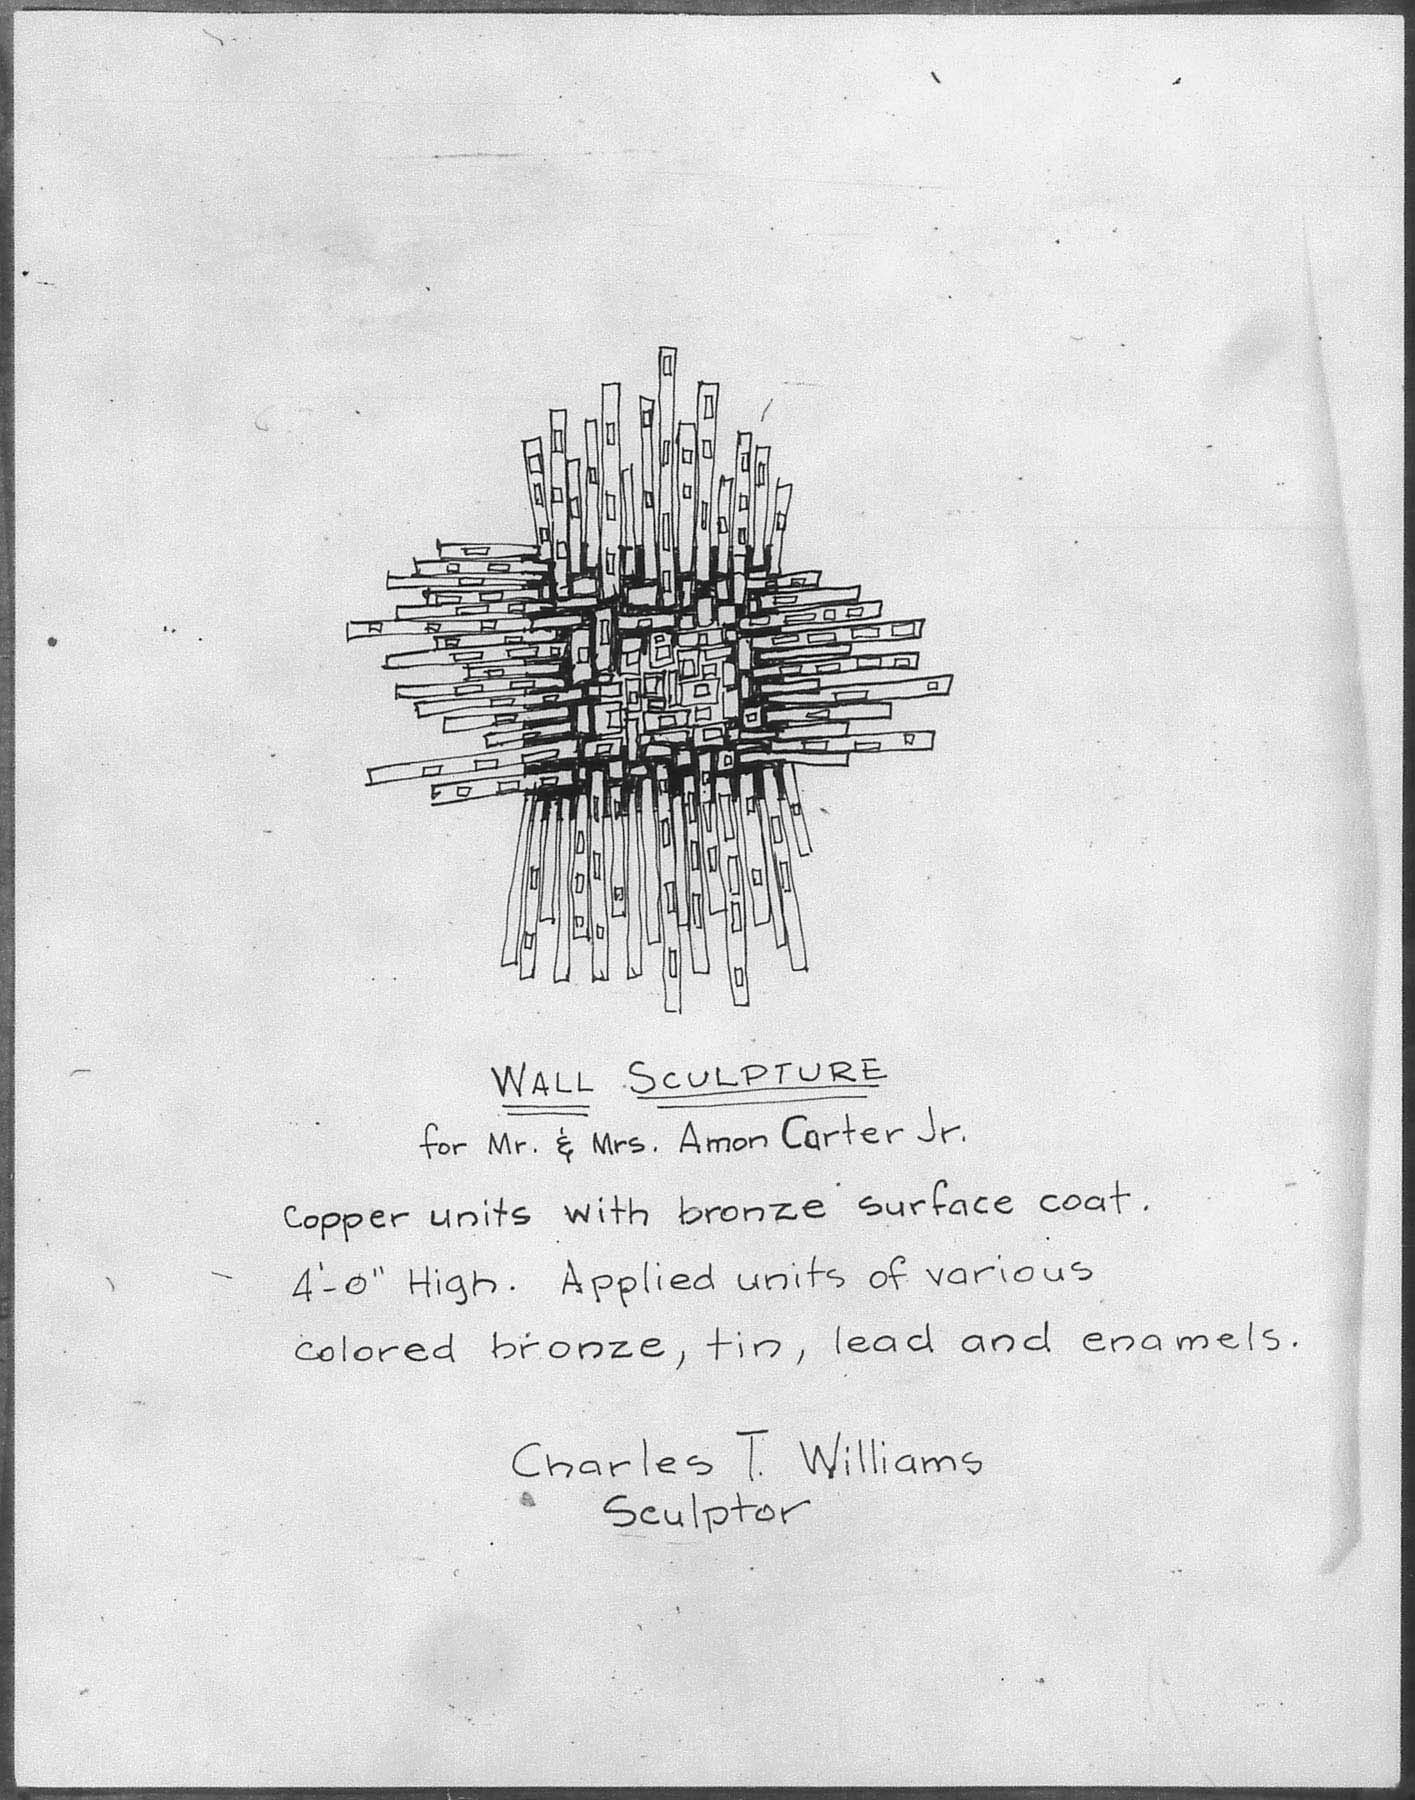 A drawing of a +-shape made up of woven lines with text that reads: “Wall sculpture for Mr. & Mrs. Amon Carter Jr. Copper units with bronze surface coat. 4‘-0“ high. Applied units of various colored bronze, tin, lead and enamels. Charles T. Williams, Sculptor”.